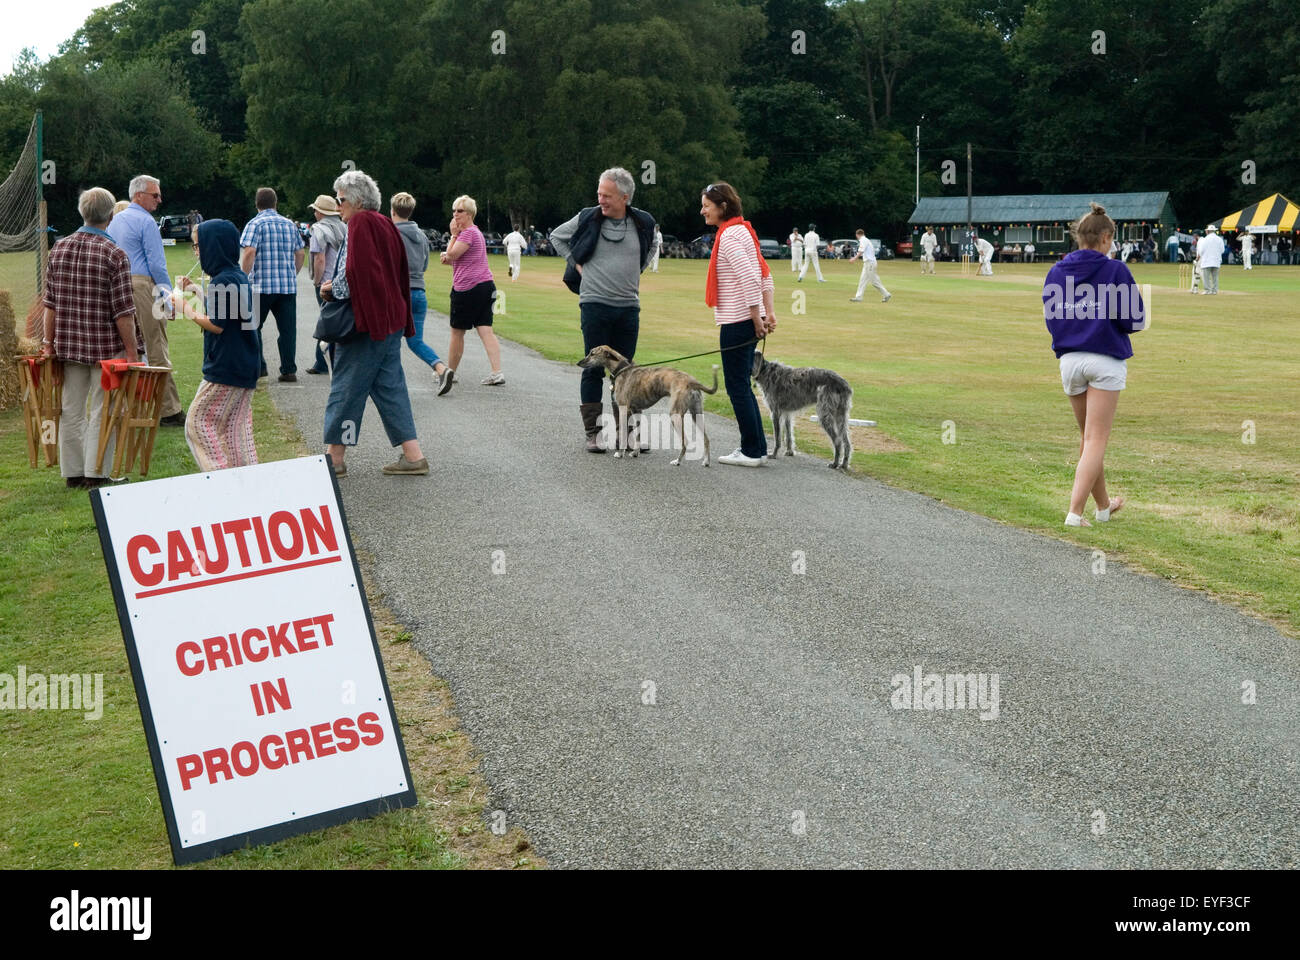 Family life in Britain, village cricket game in progress, spectators chatting. Sussex Uk  2015 2010s HOMER SYKES Stock Photo